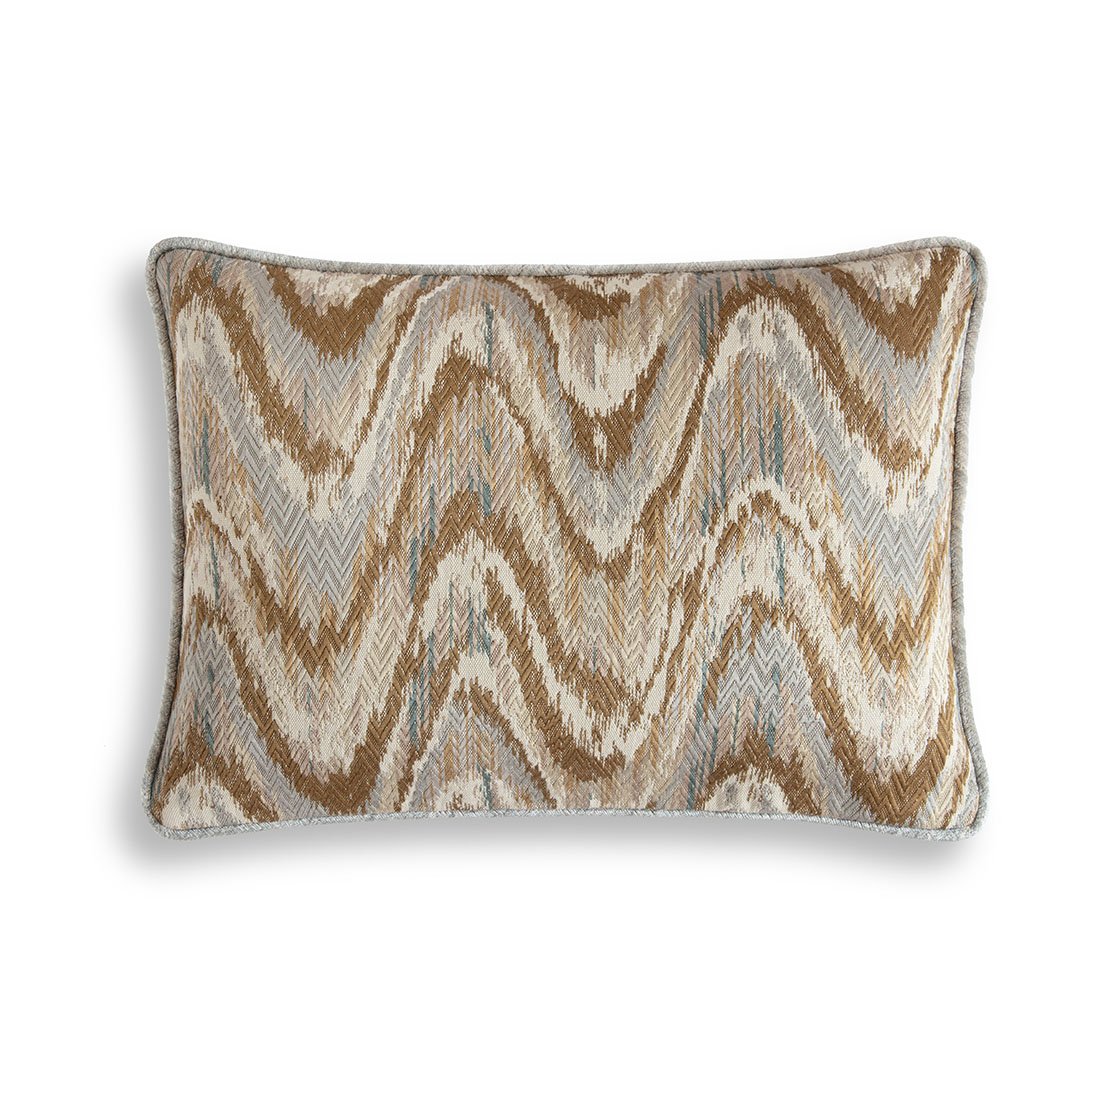 Kyma cushion - Driftwood backed and piped in Como silk velvet - Sage - Beaumont & Fletcher